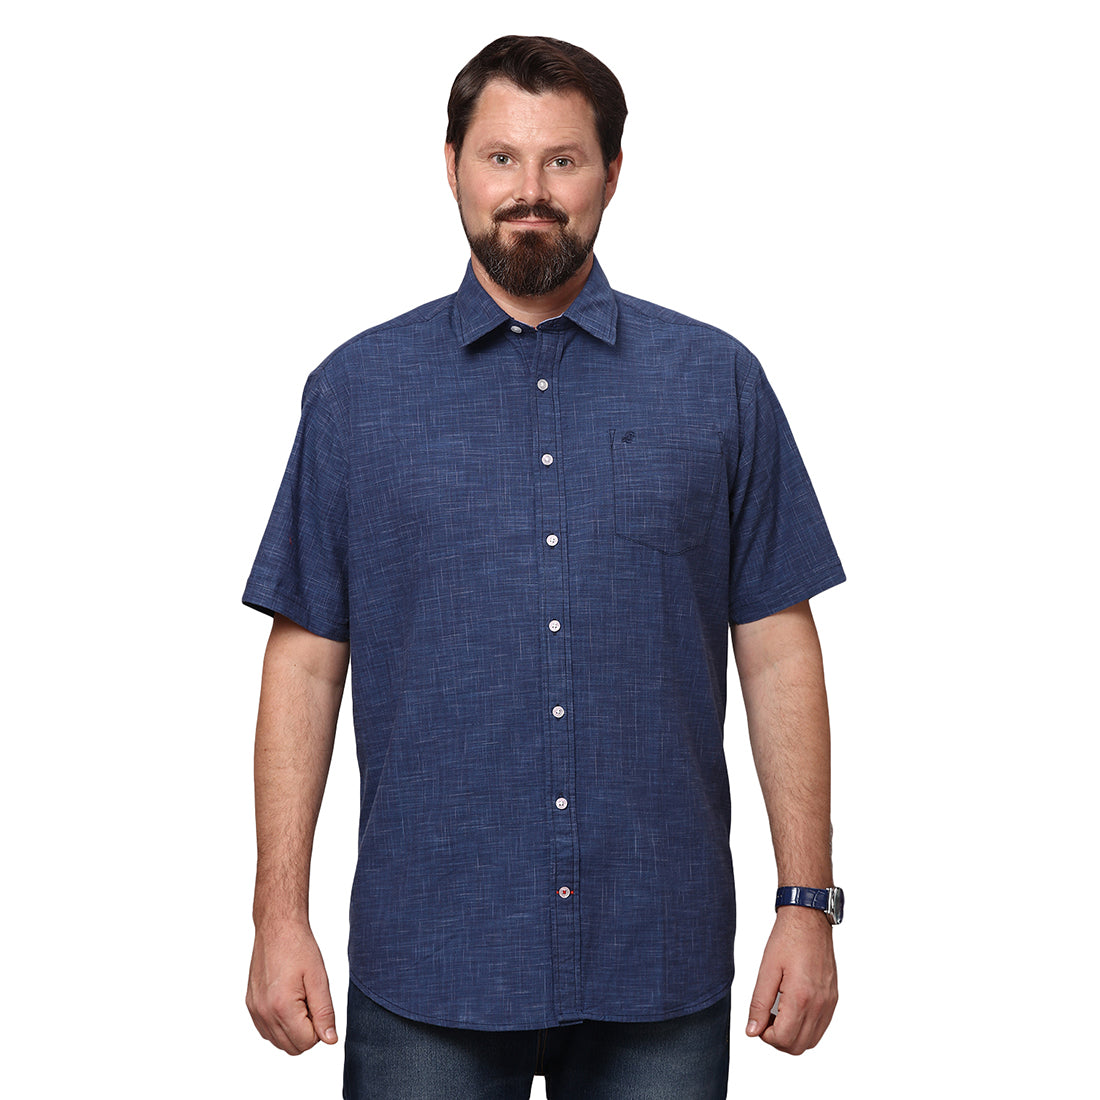 Big & Bold Solid Navy Blue Half Sleeves Slim Fit Casual Shirts (Plus Size) - Double Two